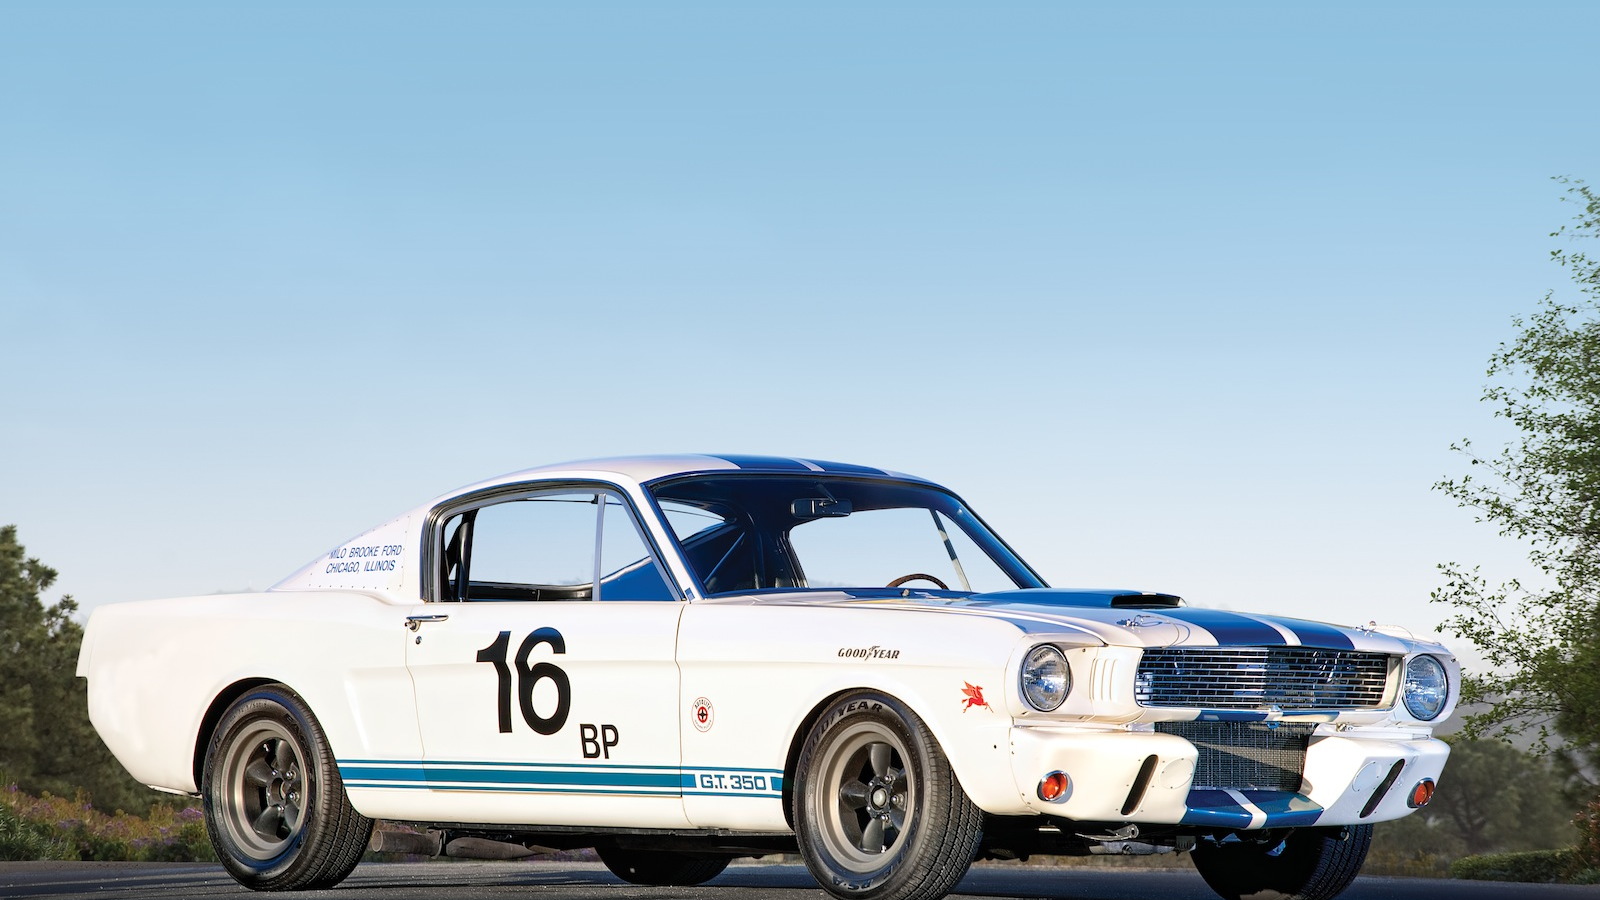 1965 Shelby GT350 R - image: Neil Fraser for RM Auctions